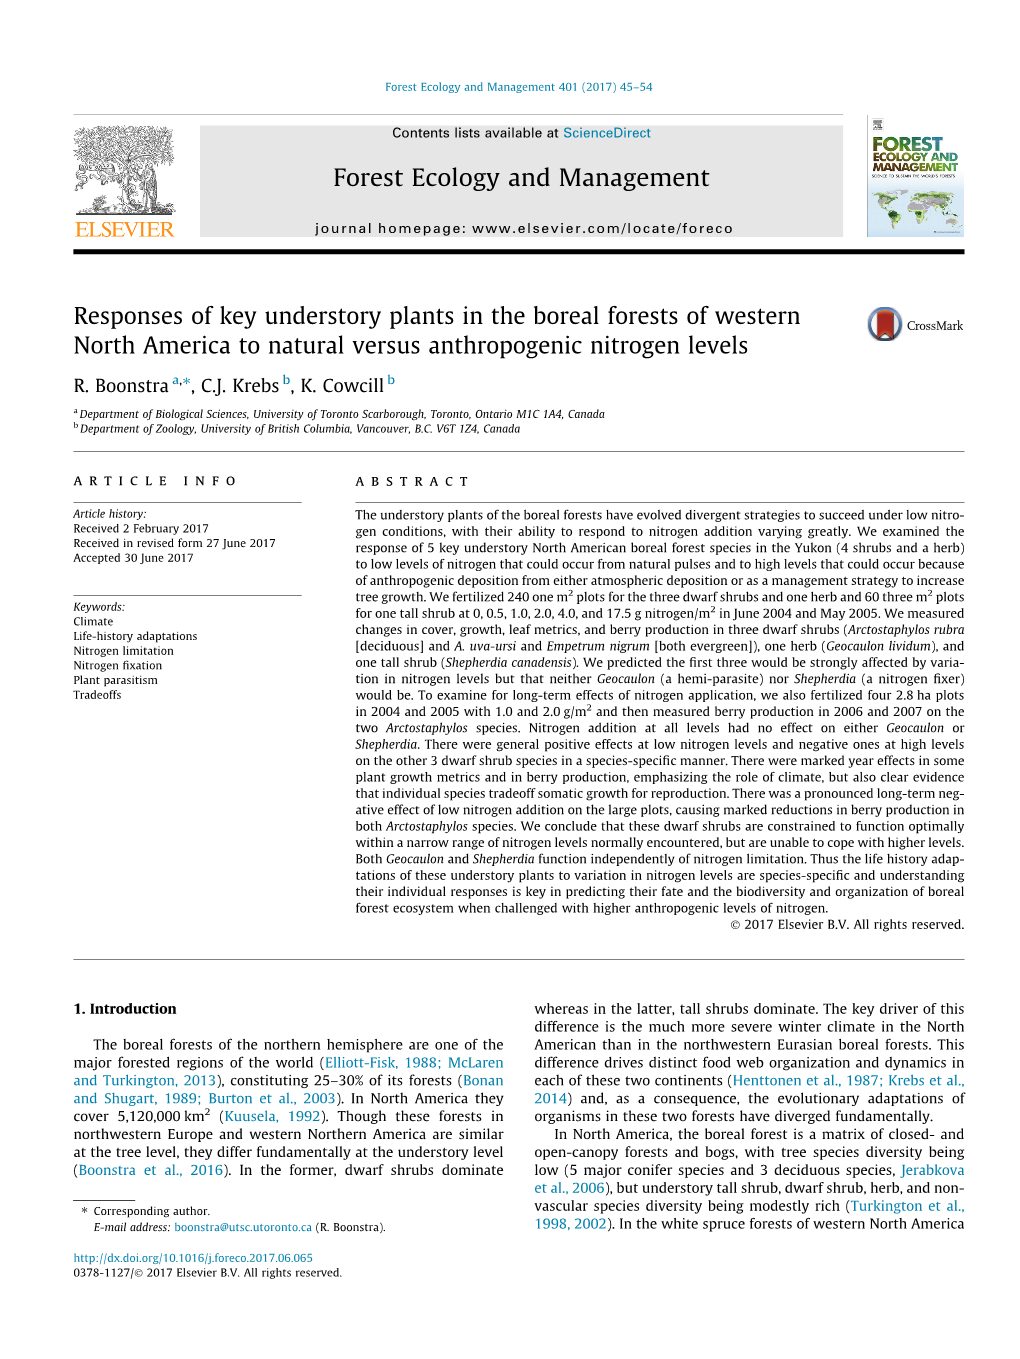 Responses of Key Understory Plants in the Boreal Forests of Western North America to Natural Versus Anthropogenic Nitrogen Levels ⇑ R